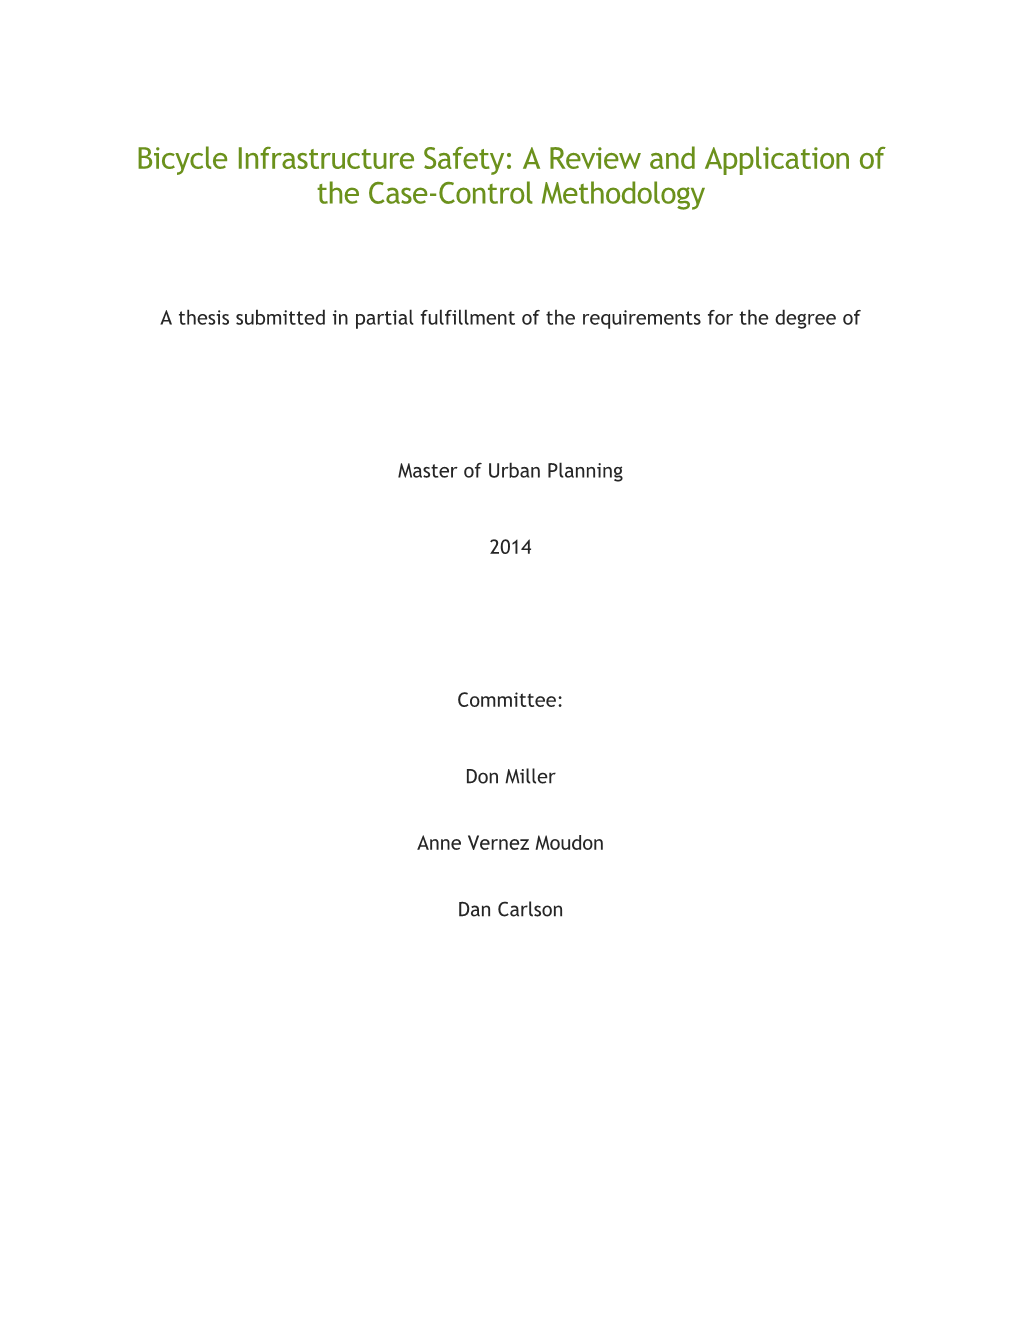 Bicycle Infrastructure Safety Evaluation Using Case-Control Methodology